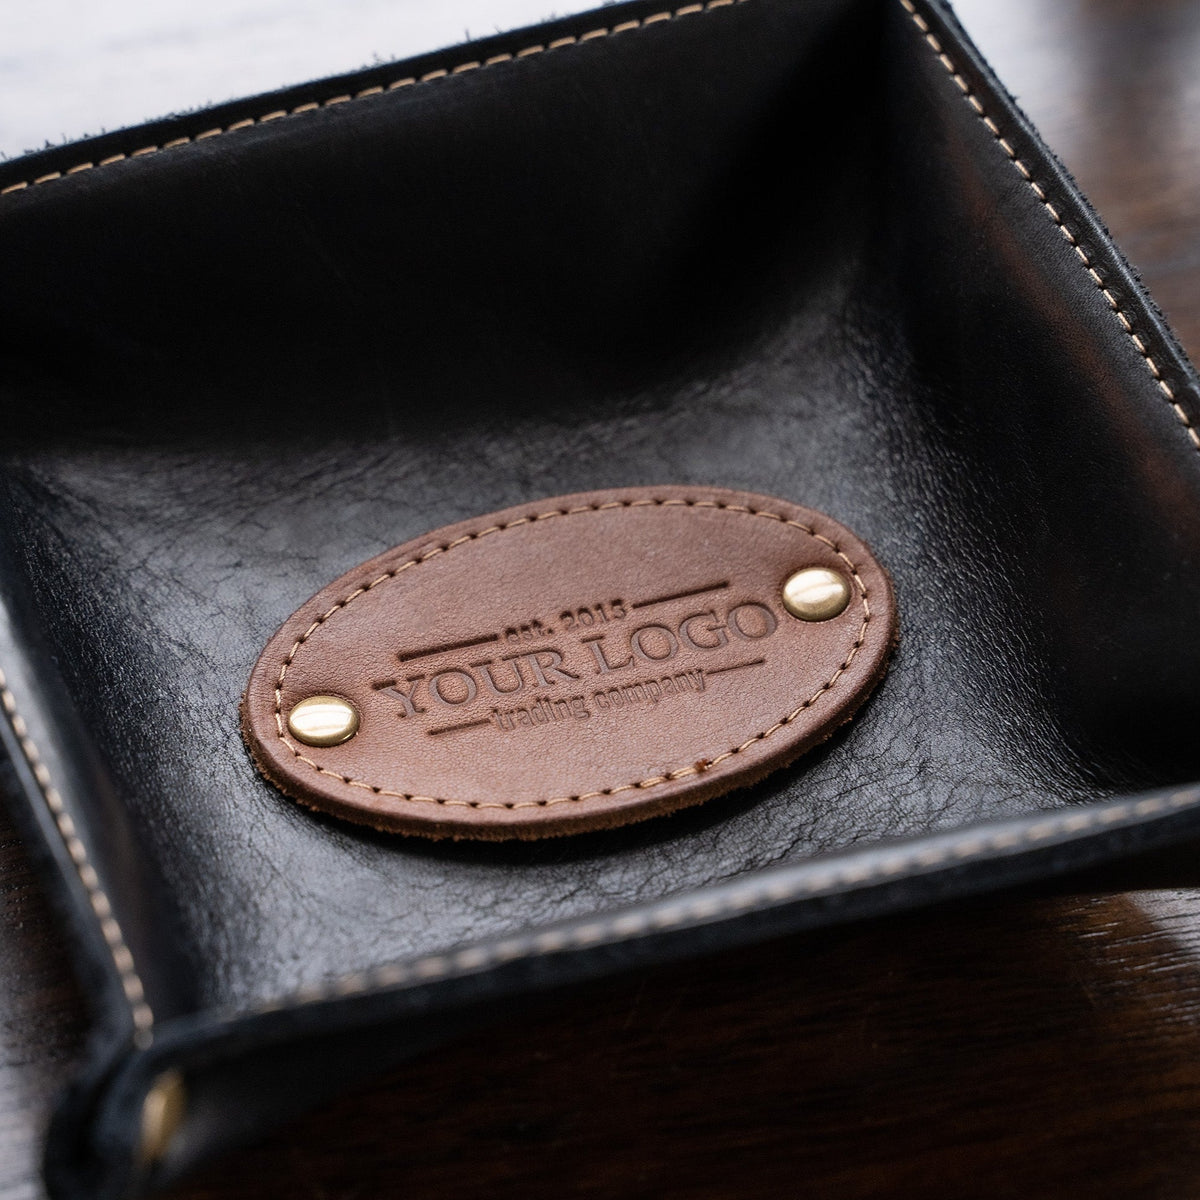 Your Logo + Our Leather - The Monticello Fine Leather Personalized Desk Valet Caddy Tray for Dresser or Office - Custom Logo and Corporate Gifting